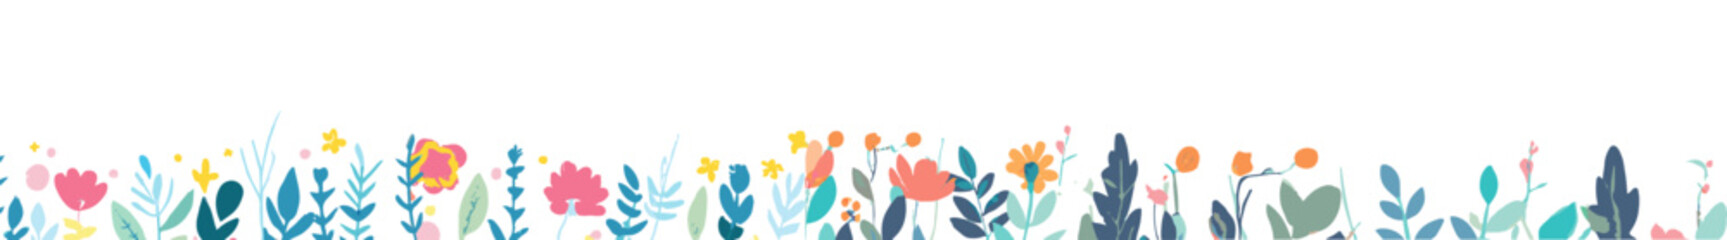 Horizontal white banner or floral background and border with multicolor blooming petals. Spring plants flat vector illustration on white background.